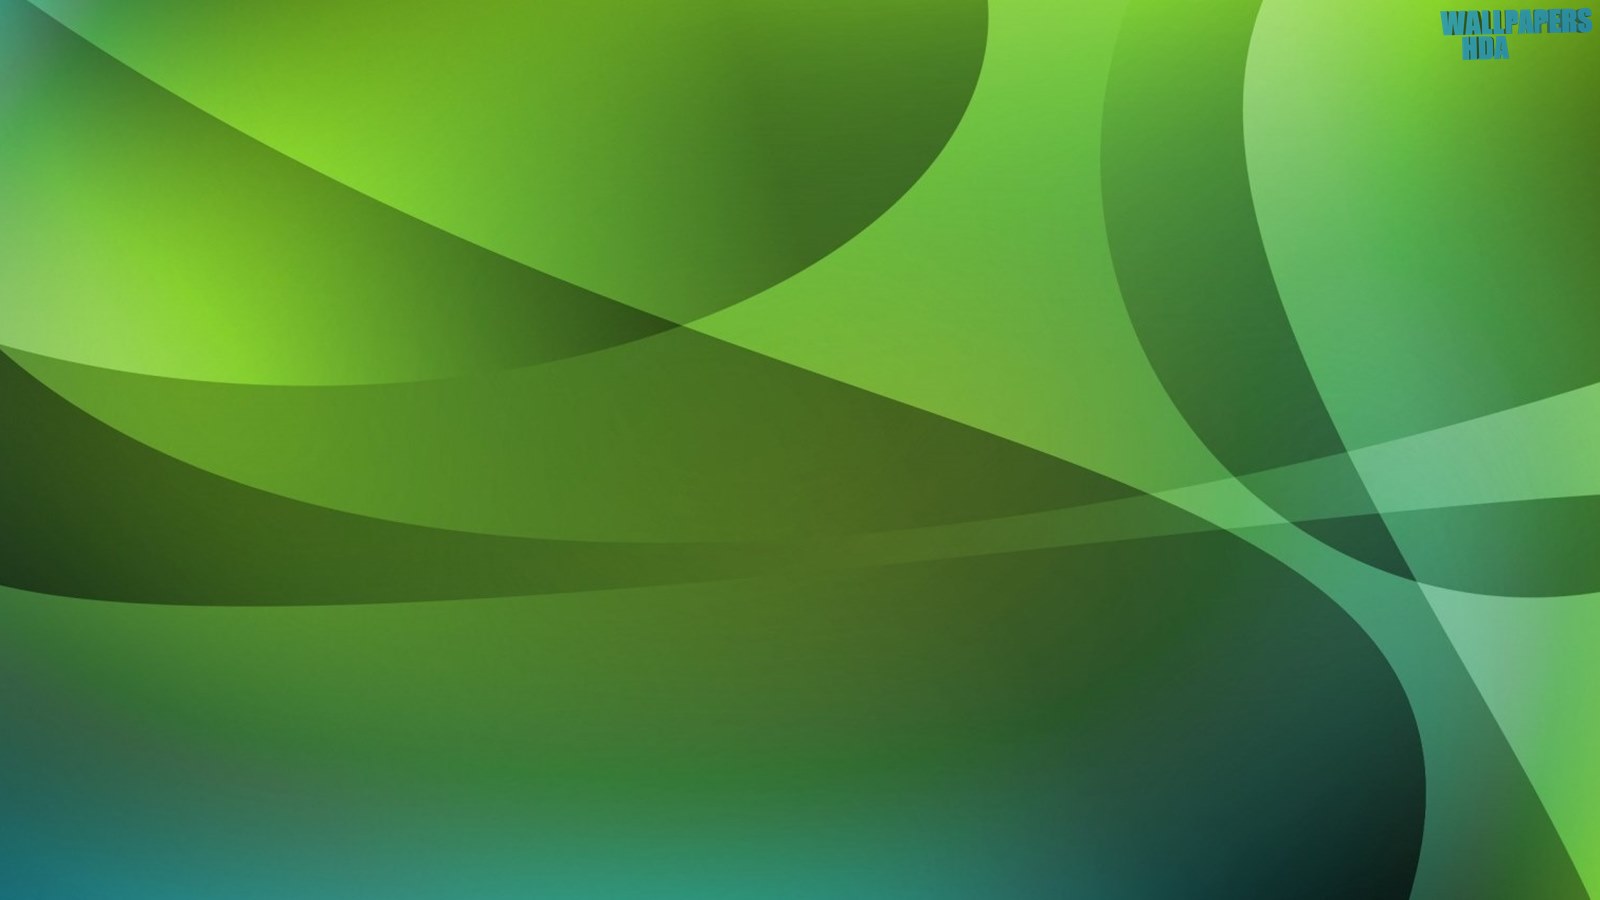 Abstract graphic design green wallpaper 1600x900